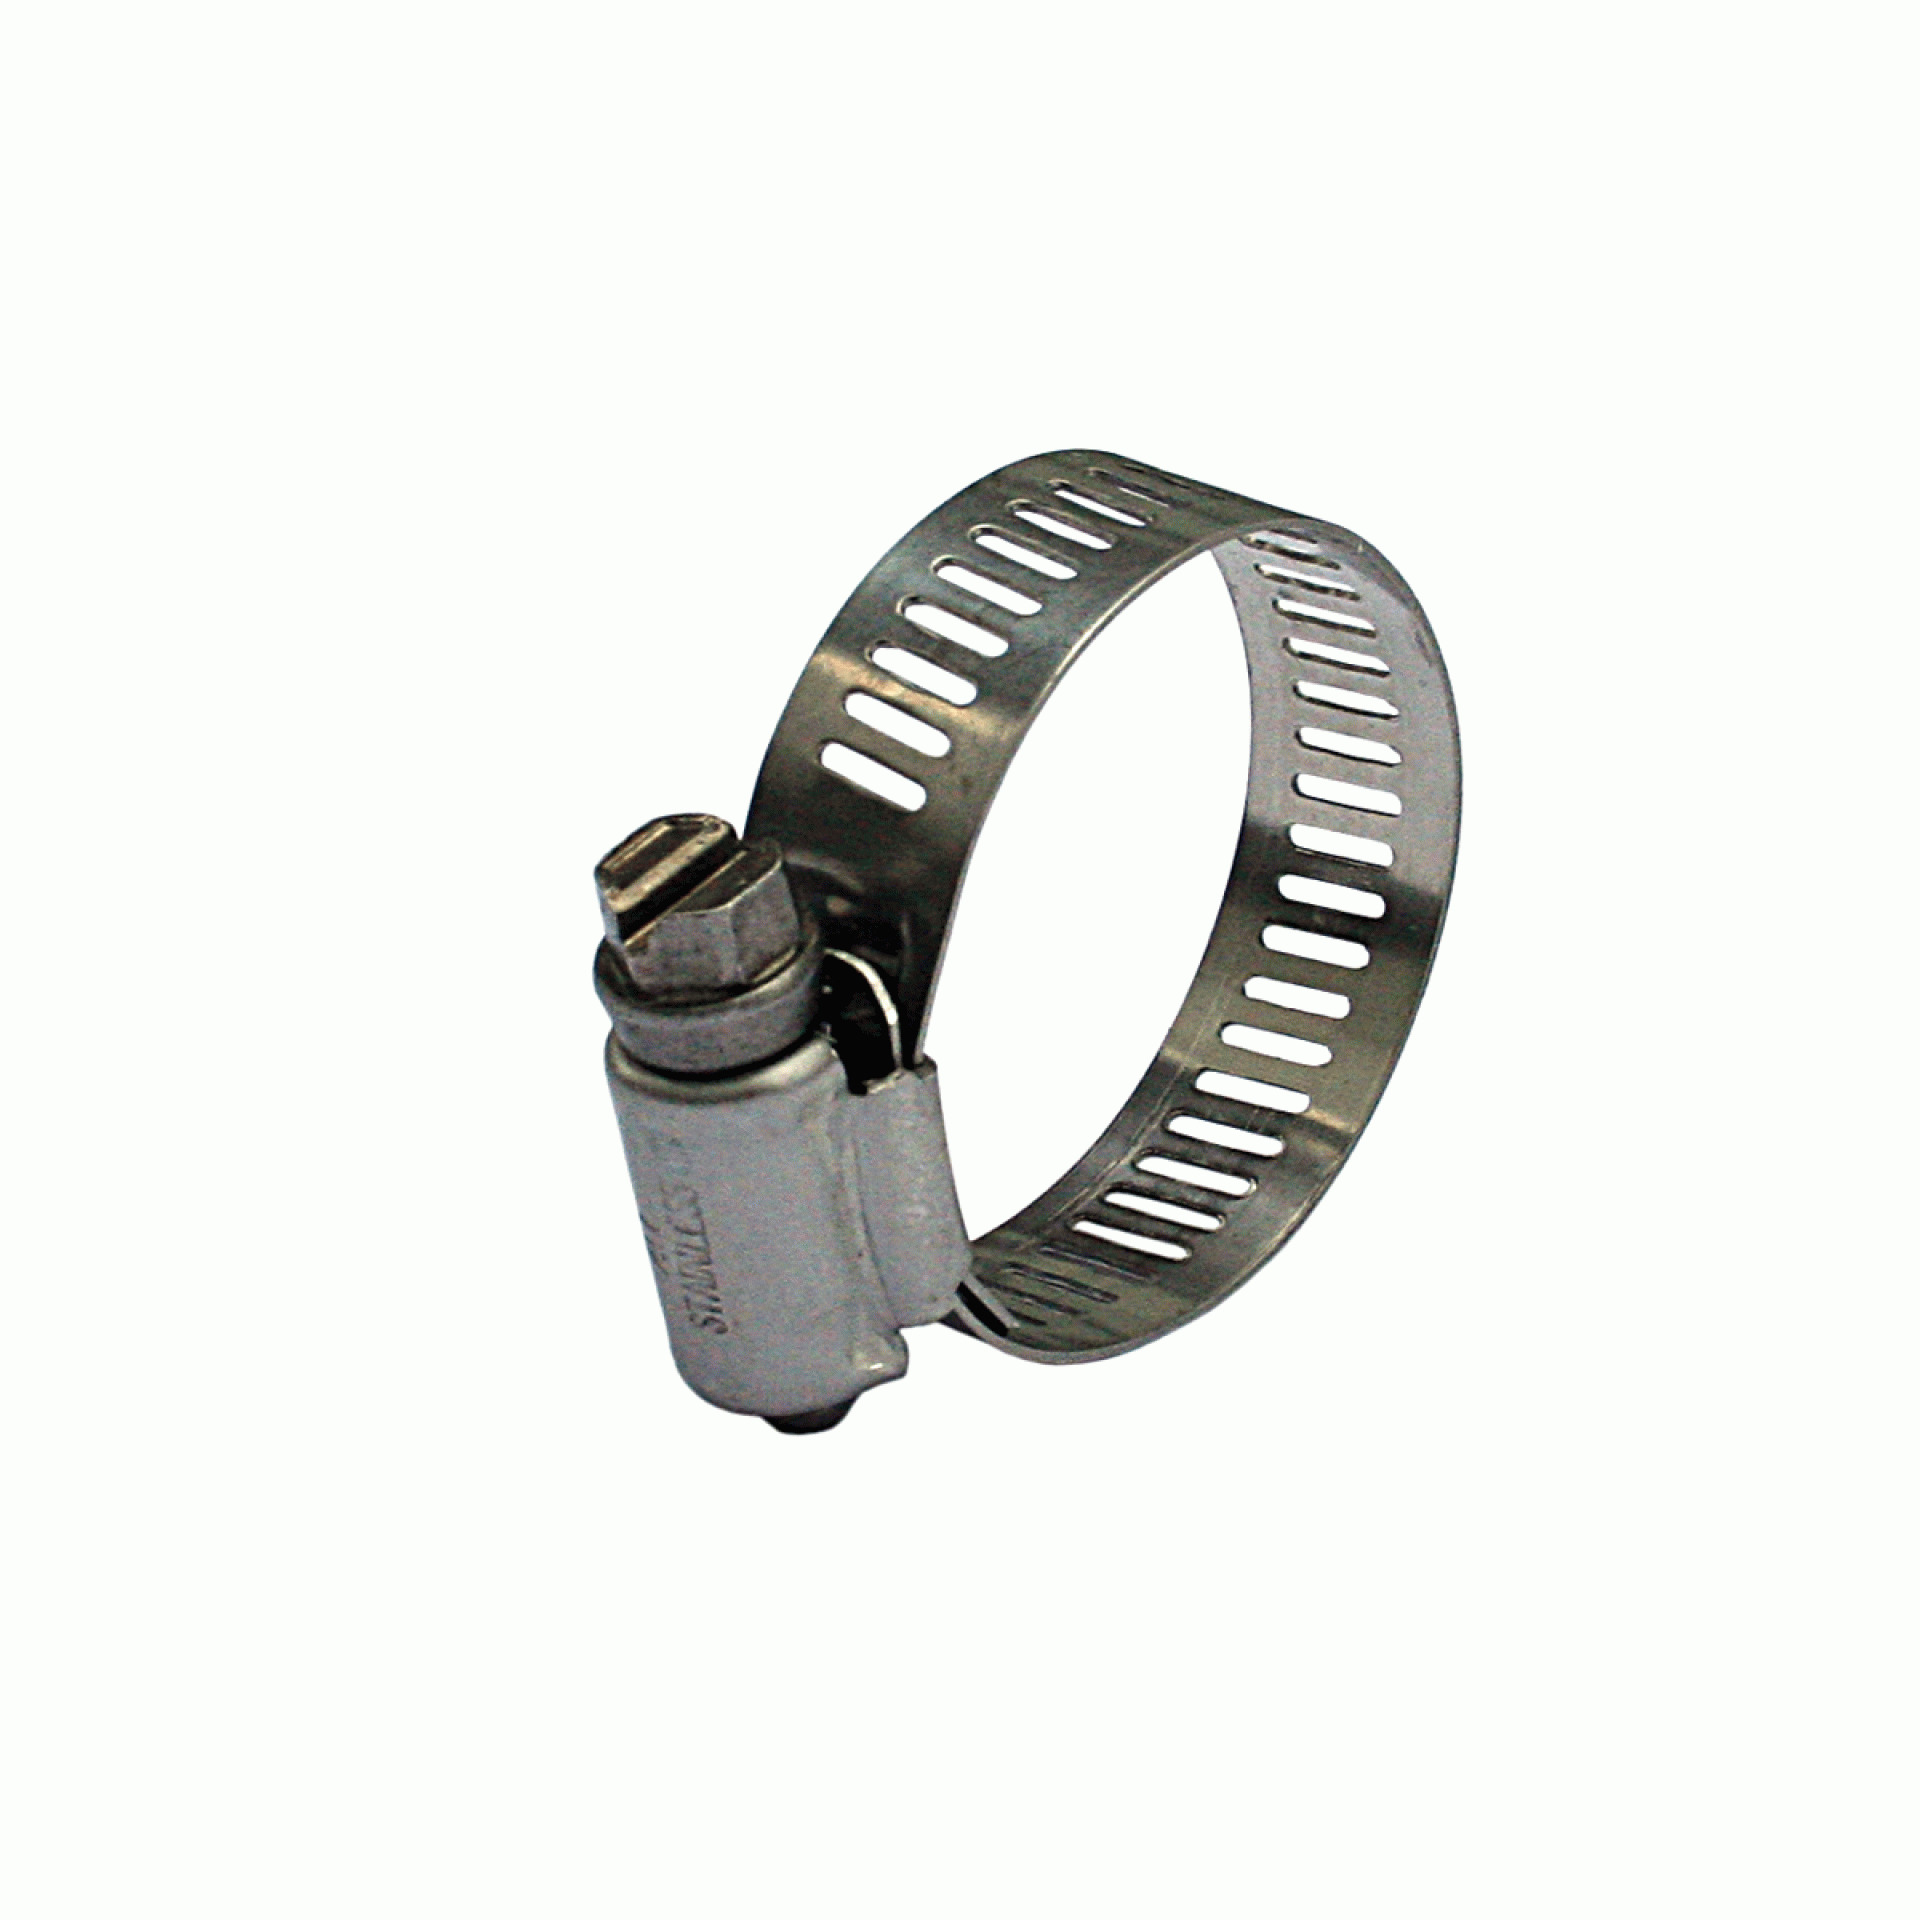 DUPAGE PRODUCTS GROUP | B16HS | DIA. MIN. 11/16" MAX. 1-1/2" FITS HOSE: 3/4" TO 1"